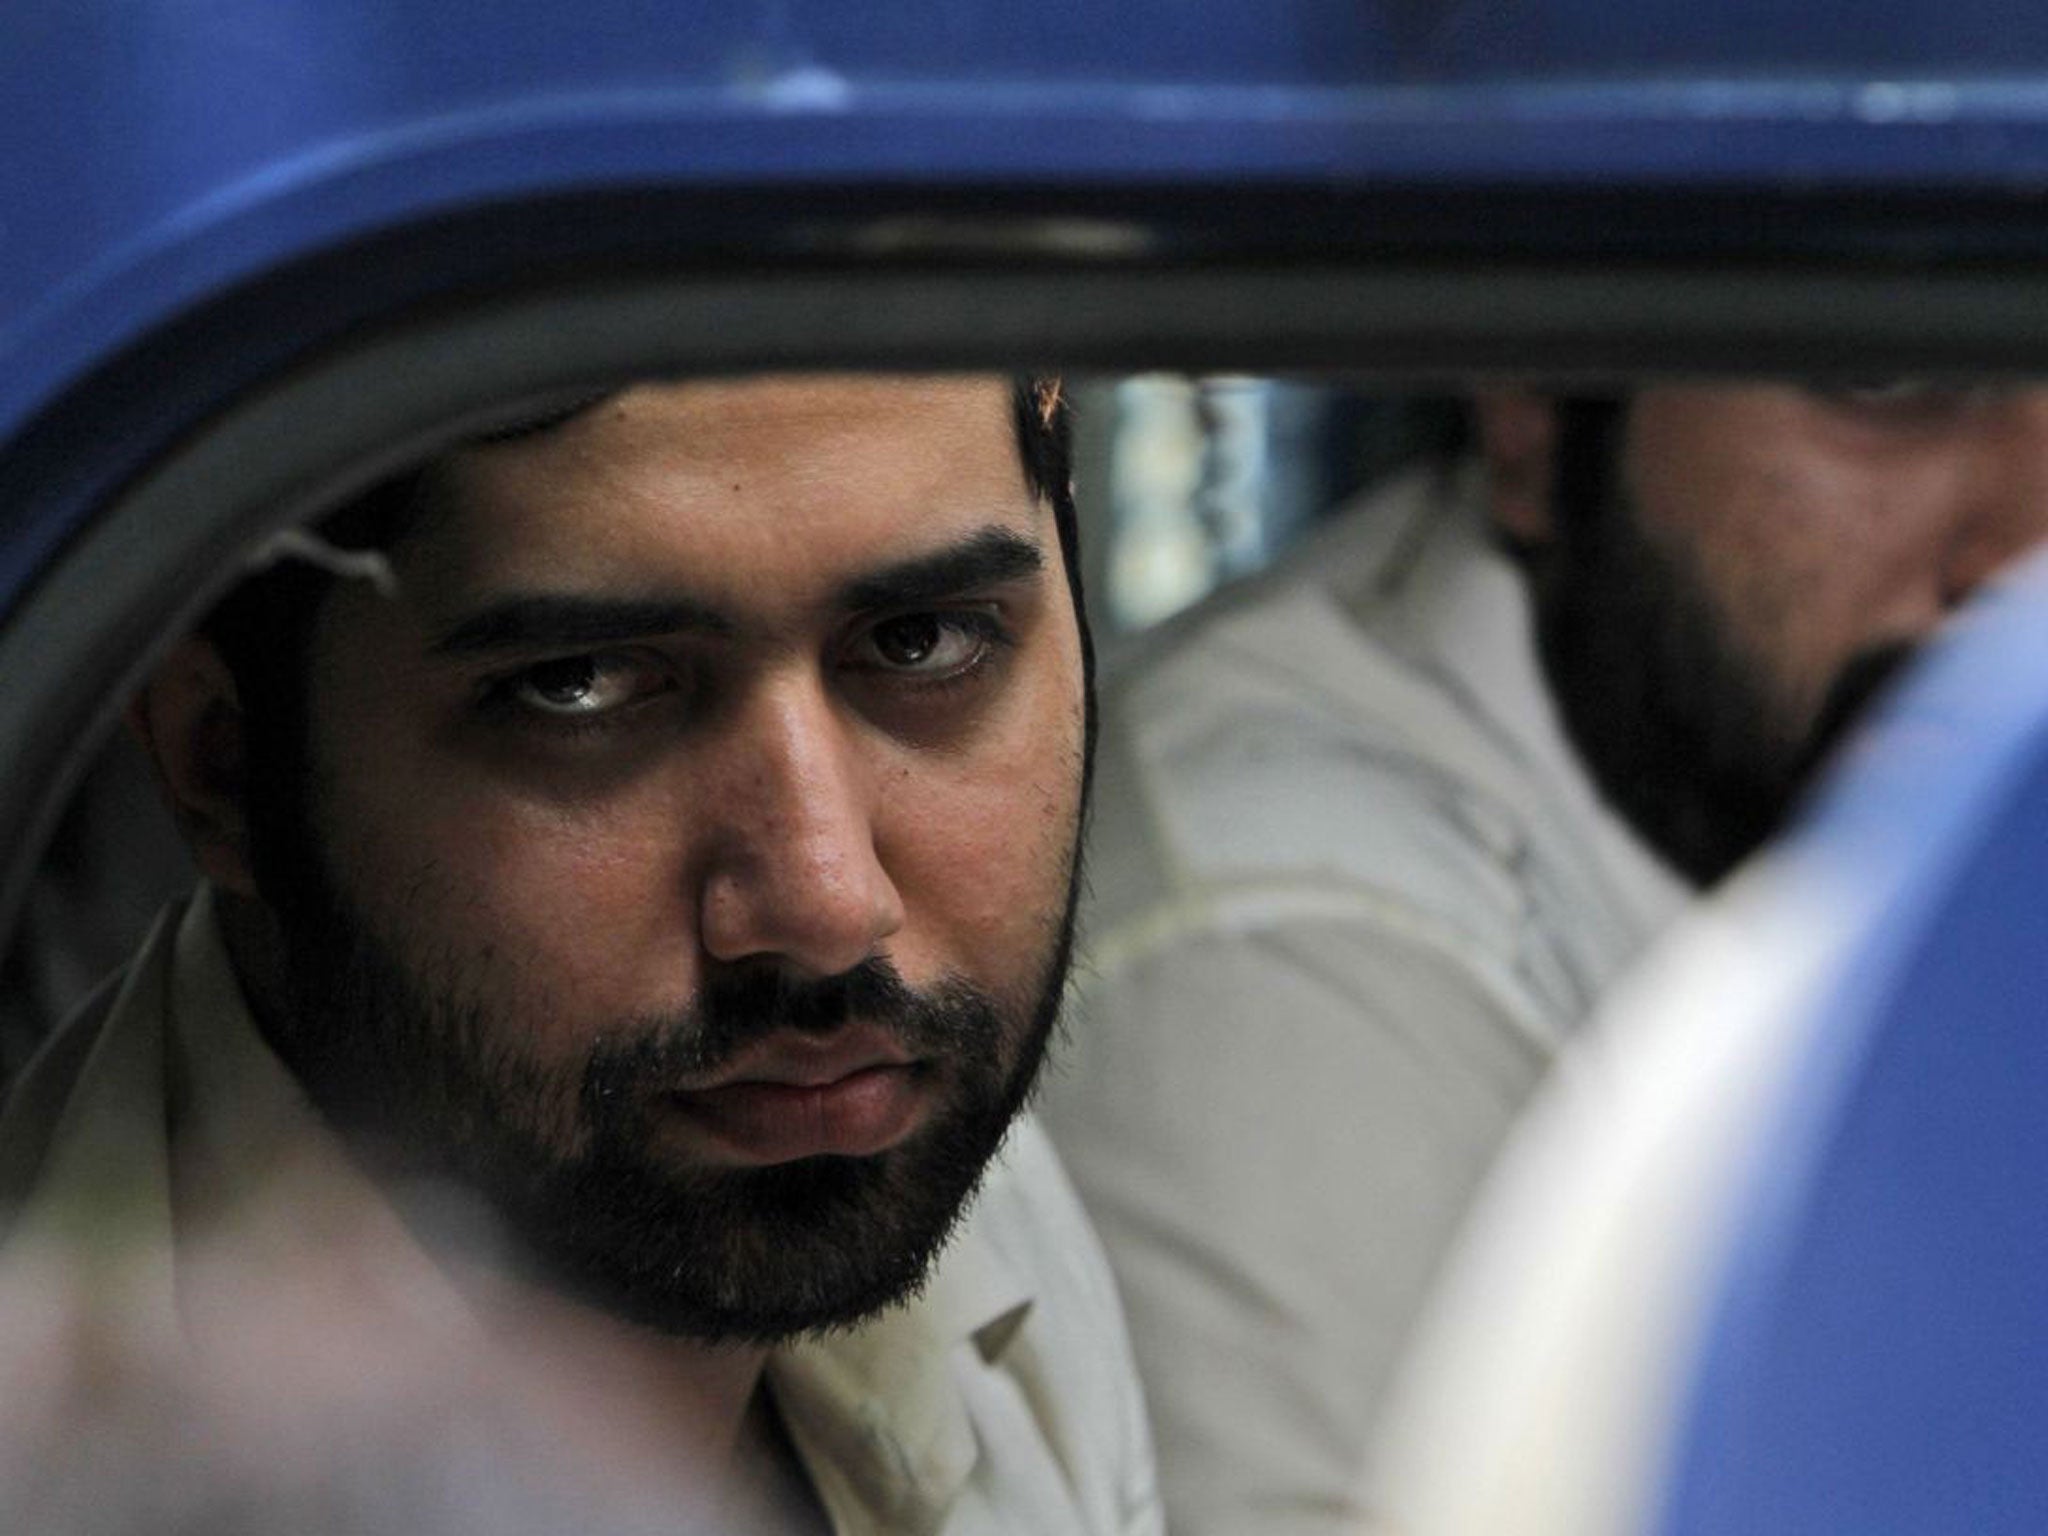 Nawab Siraj Talpur, convicted of killing 20-year-old Shahzeb Khan, looks out a police vehicle outside an Anti-Terrorism court in Karachi